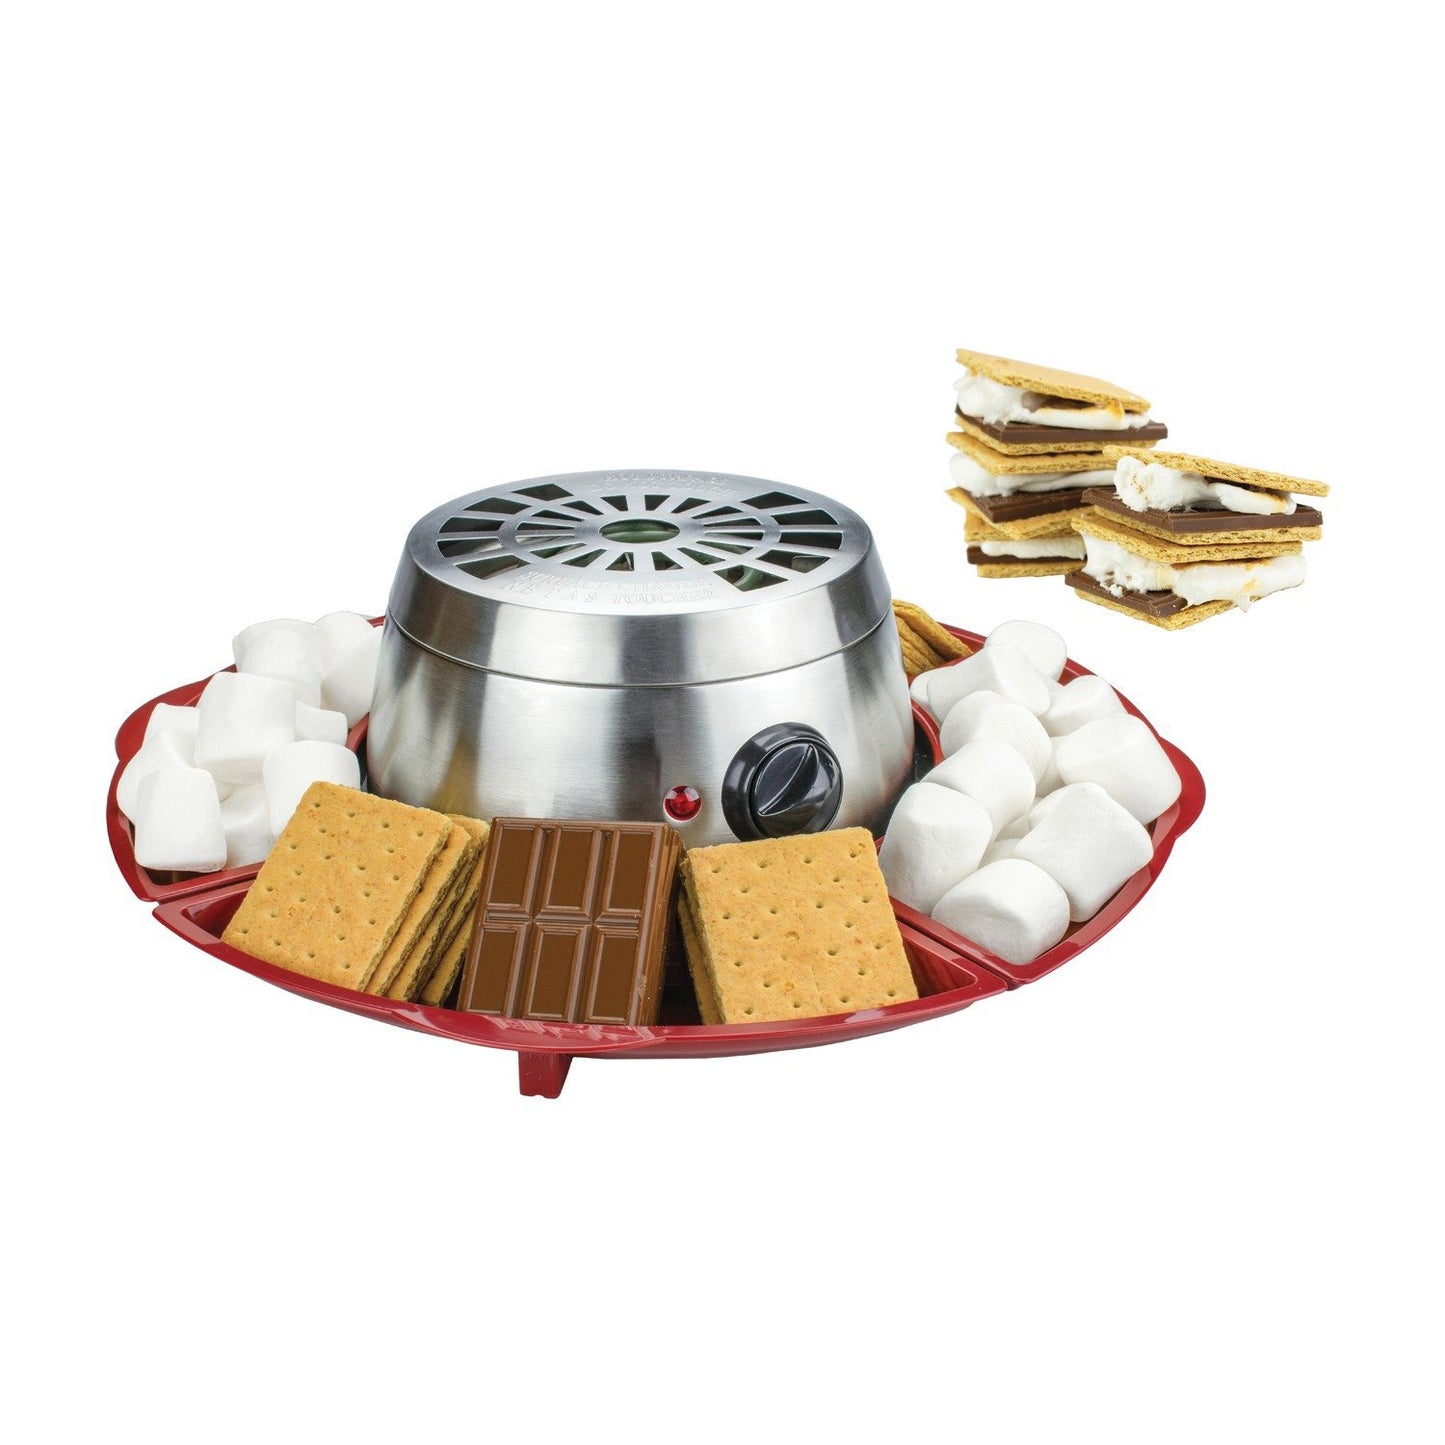 Brentwood Appl. TS-603 Indoor Electric S-Steel Smores Maker w/4 Trays & Forks